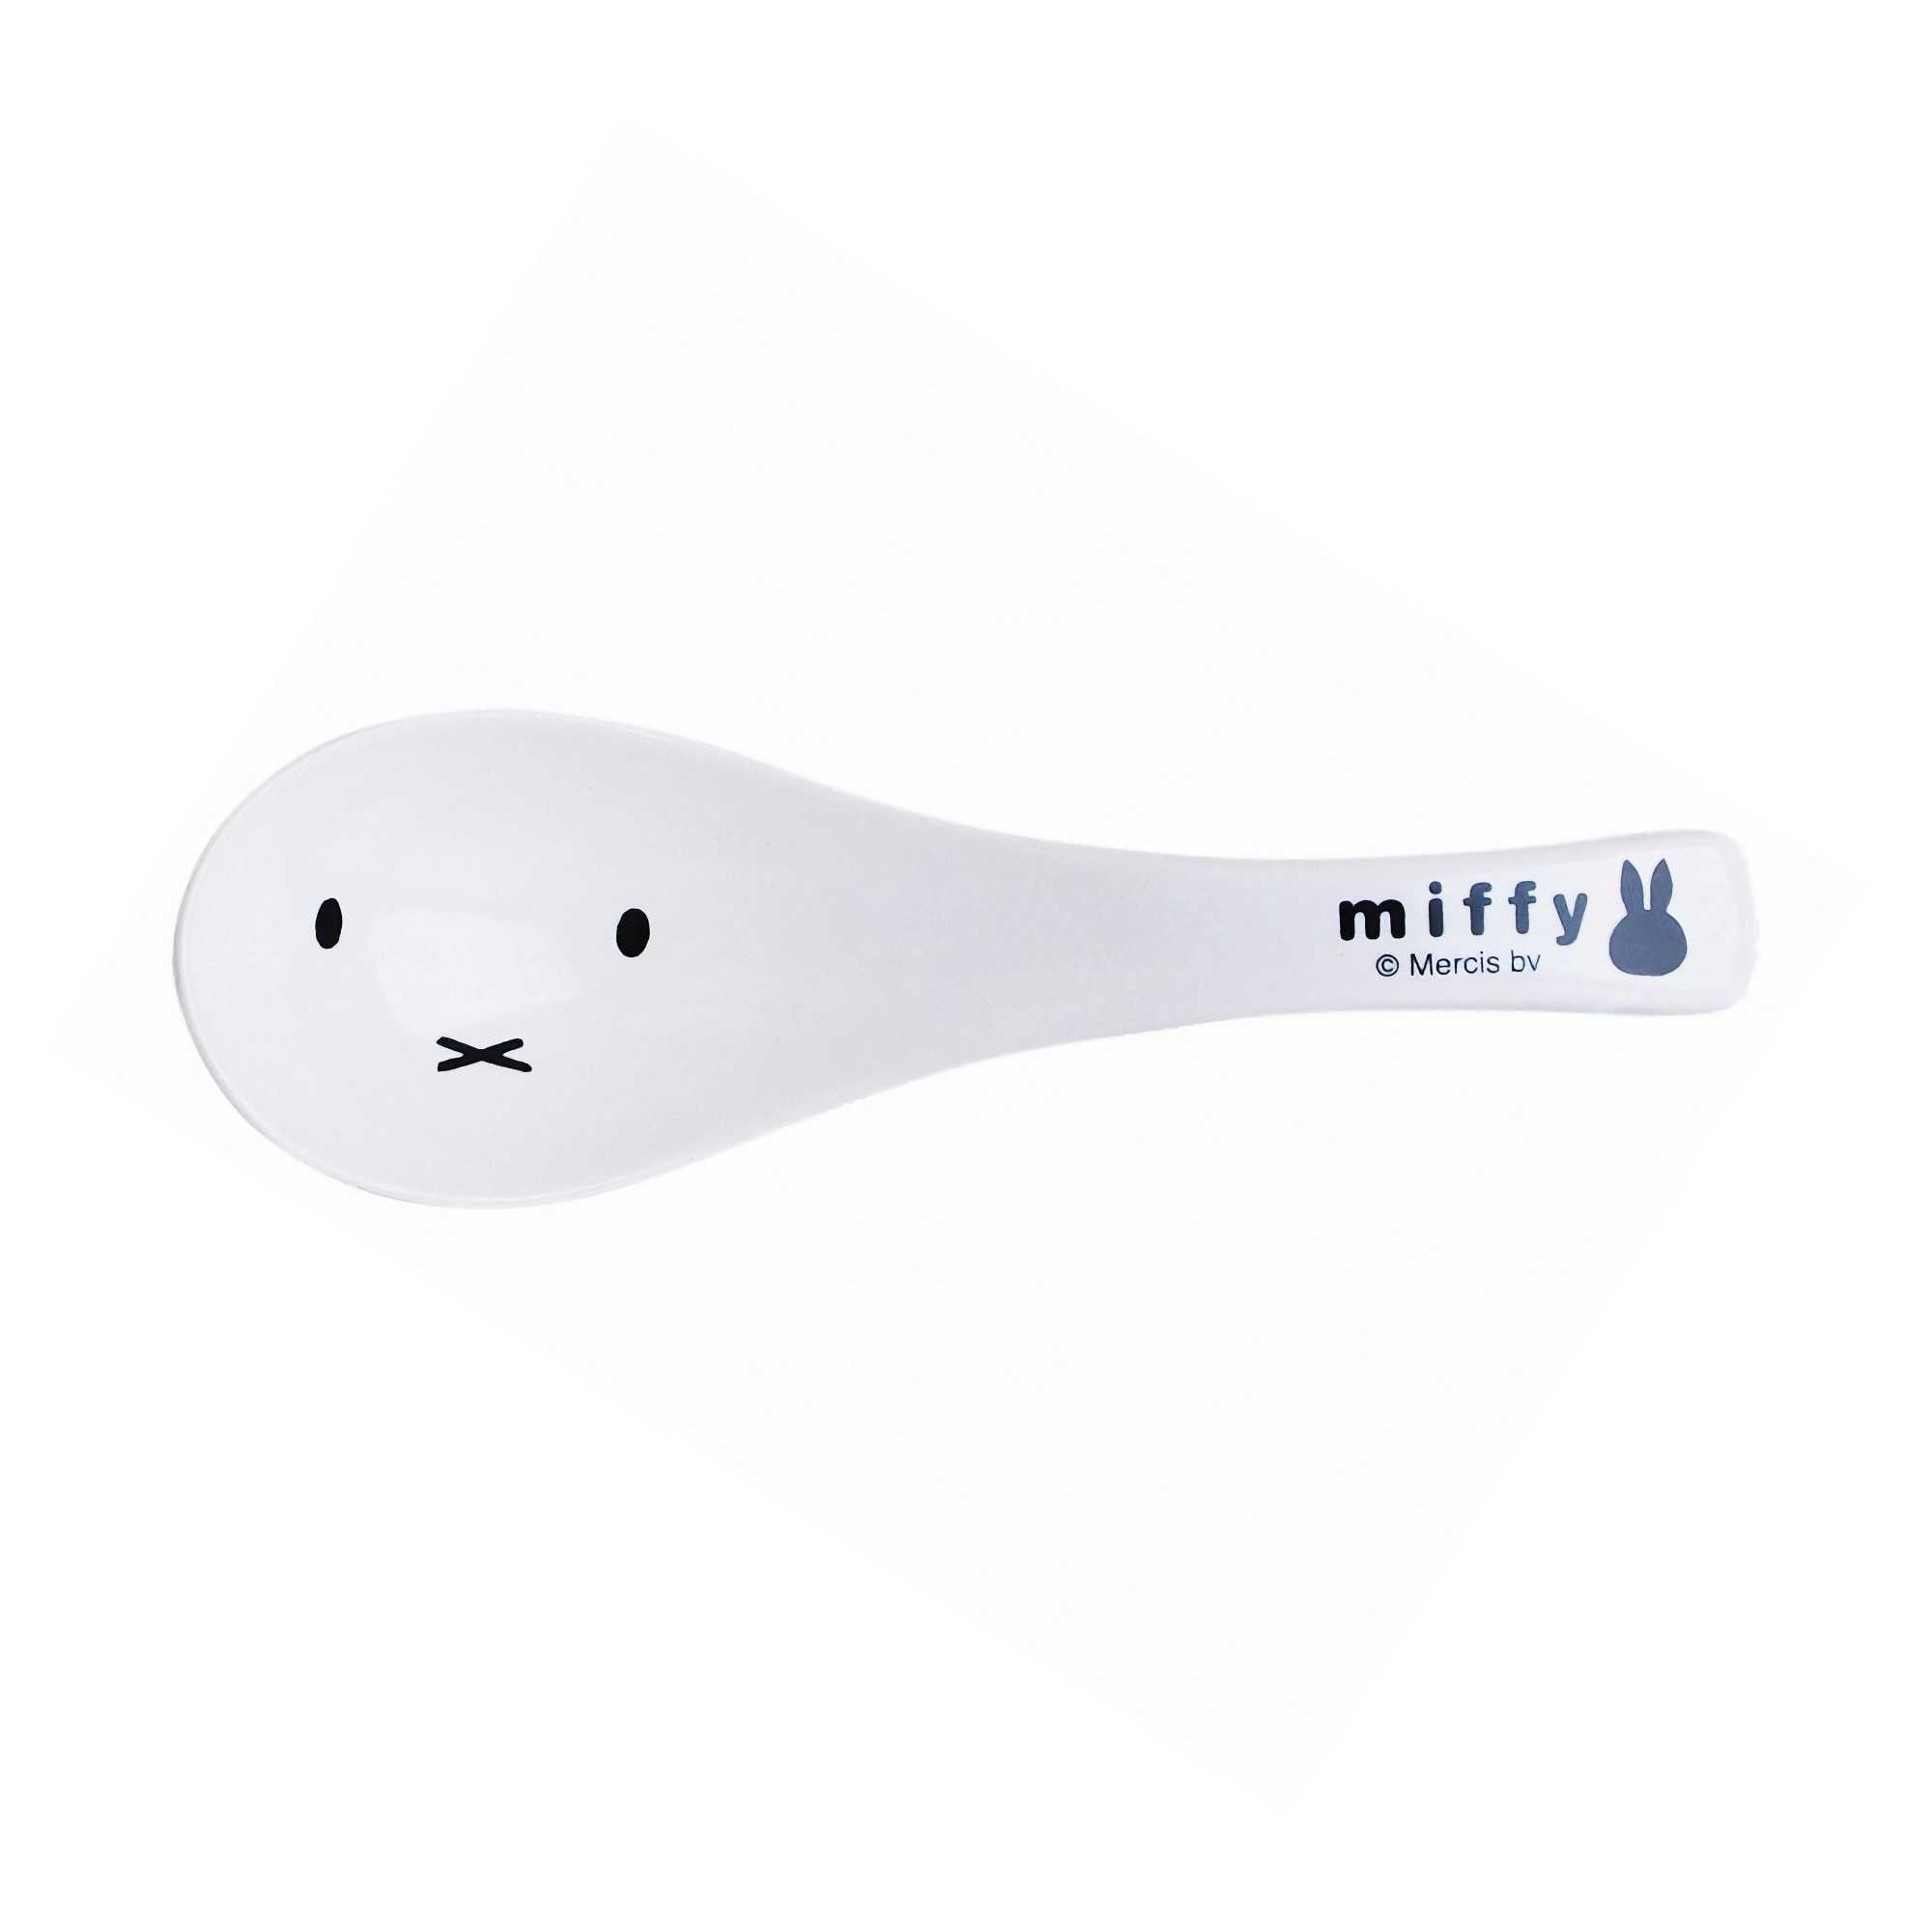 Miffy face spoon